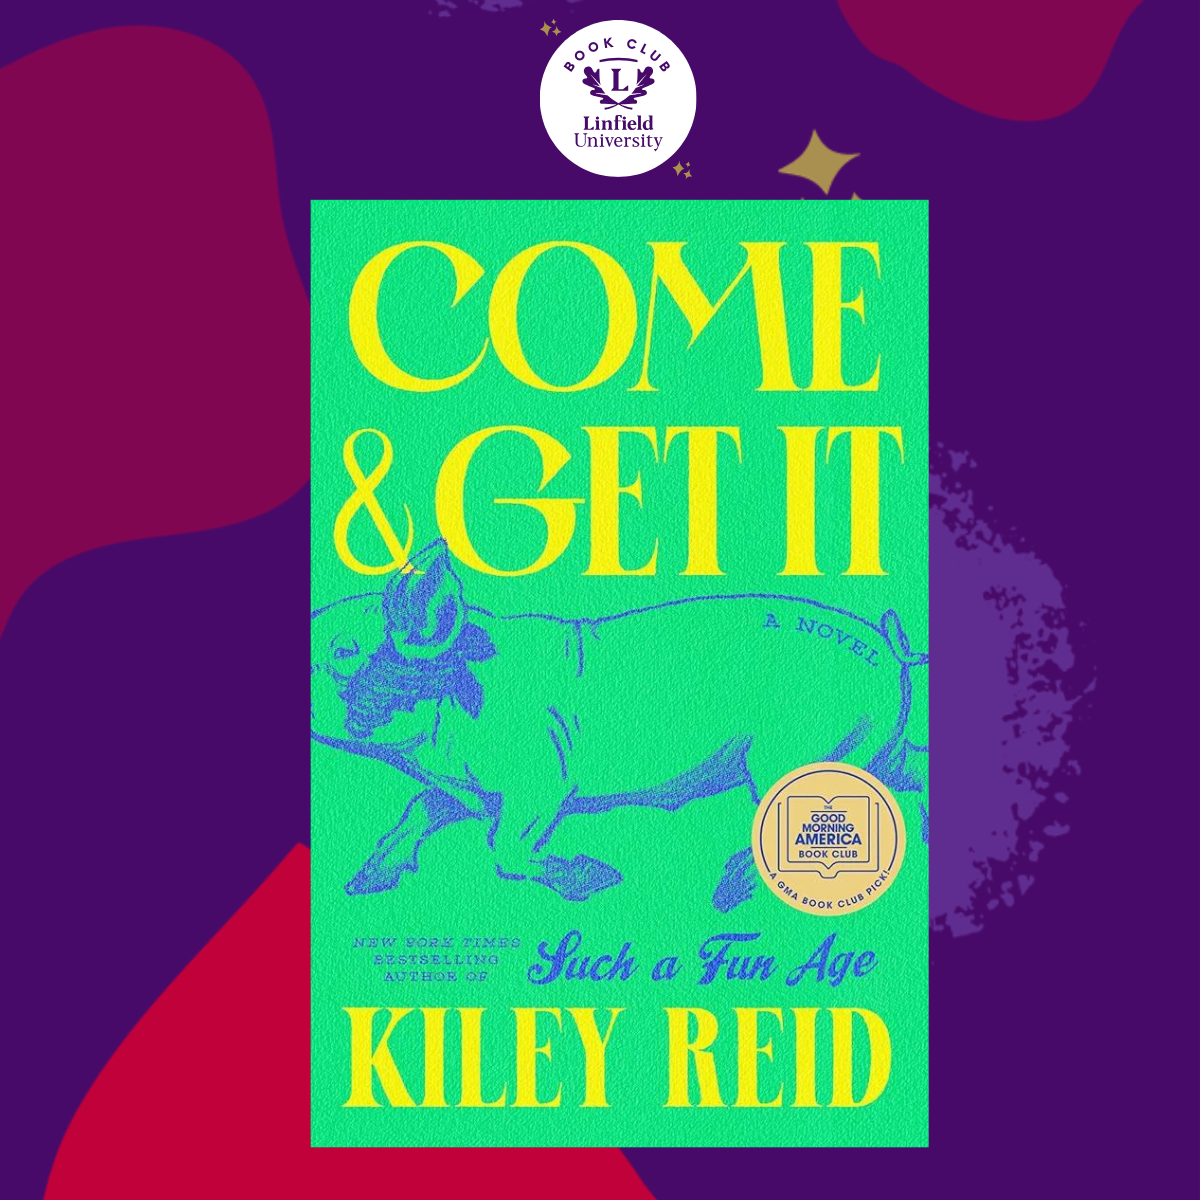 The cover of "Come & Get It" by Kiley Reid is displayed over a purple background